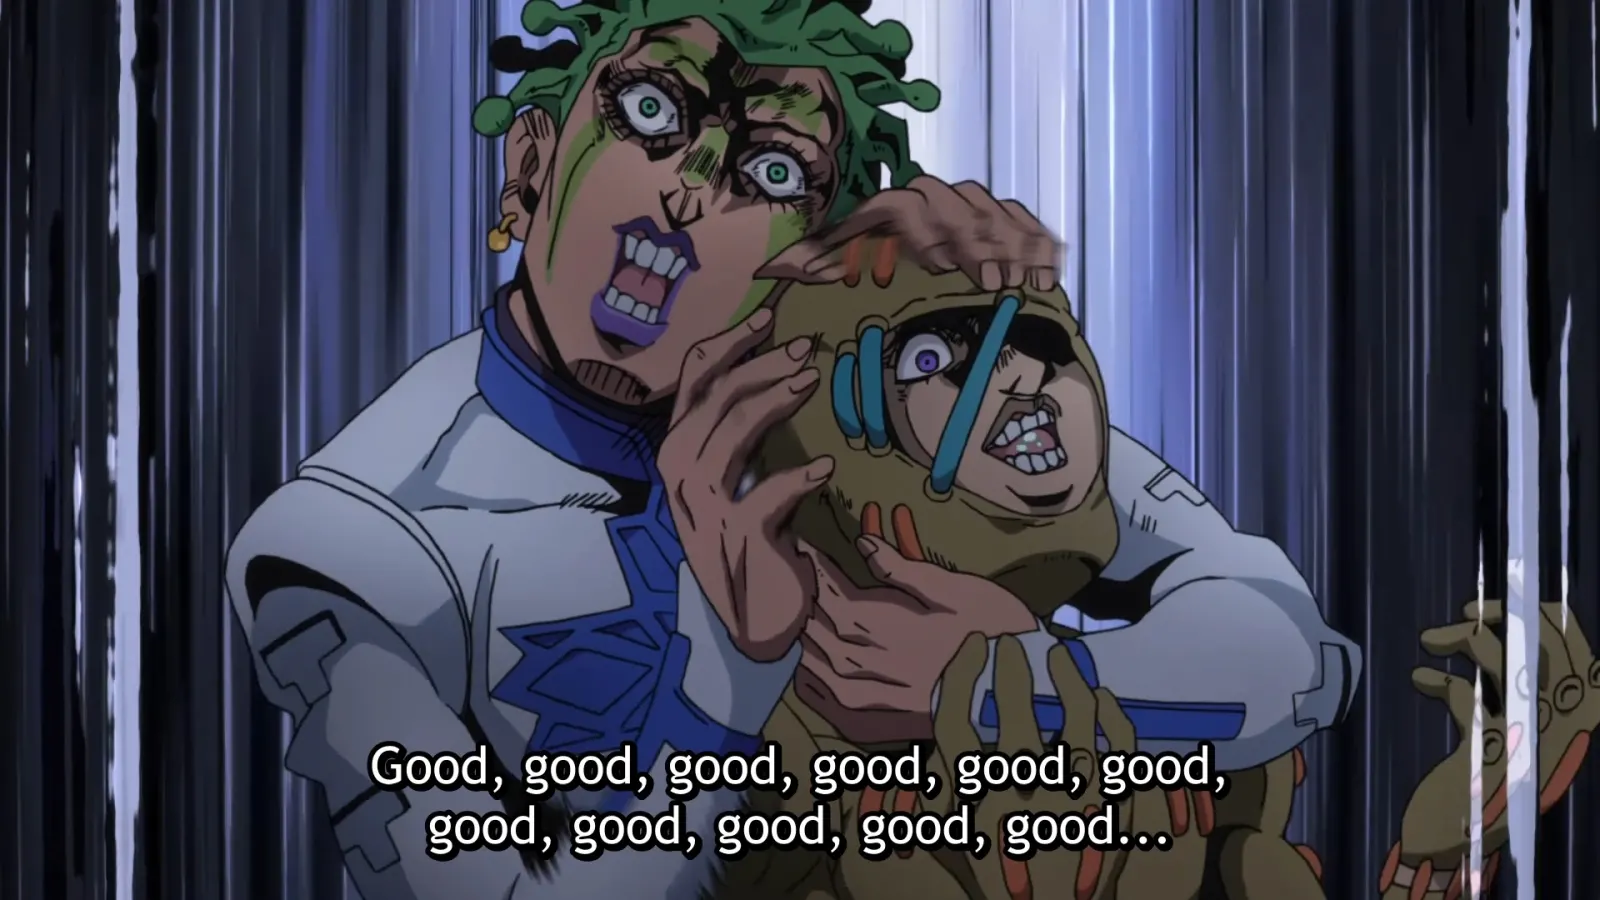 Standard JOJO’s insanity with larger-than-life bad guys... stroking each other.